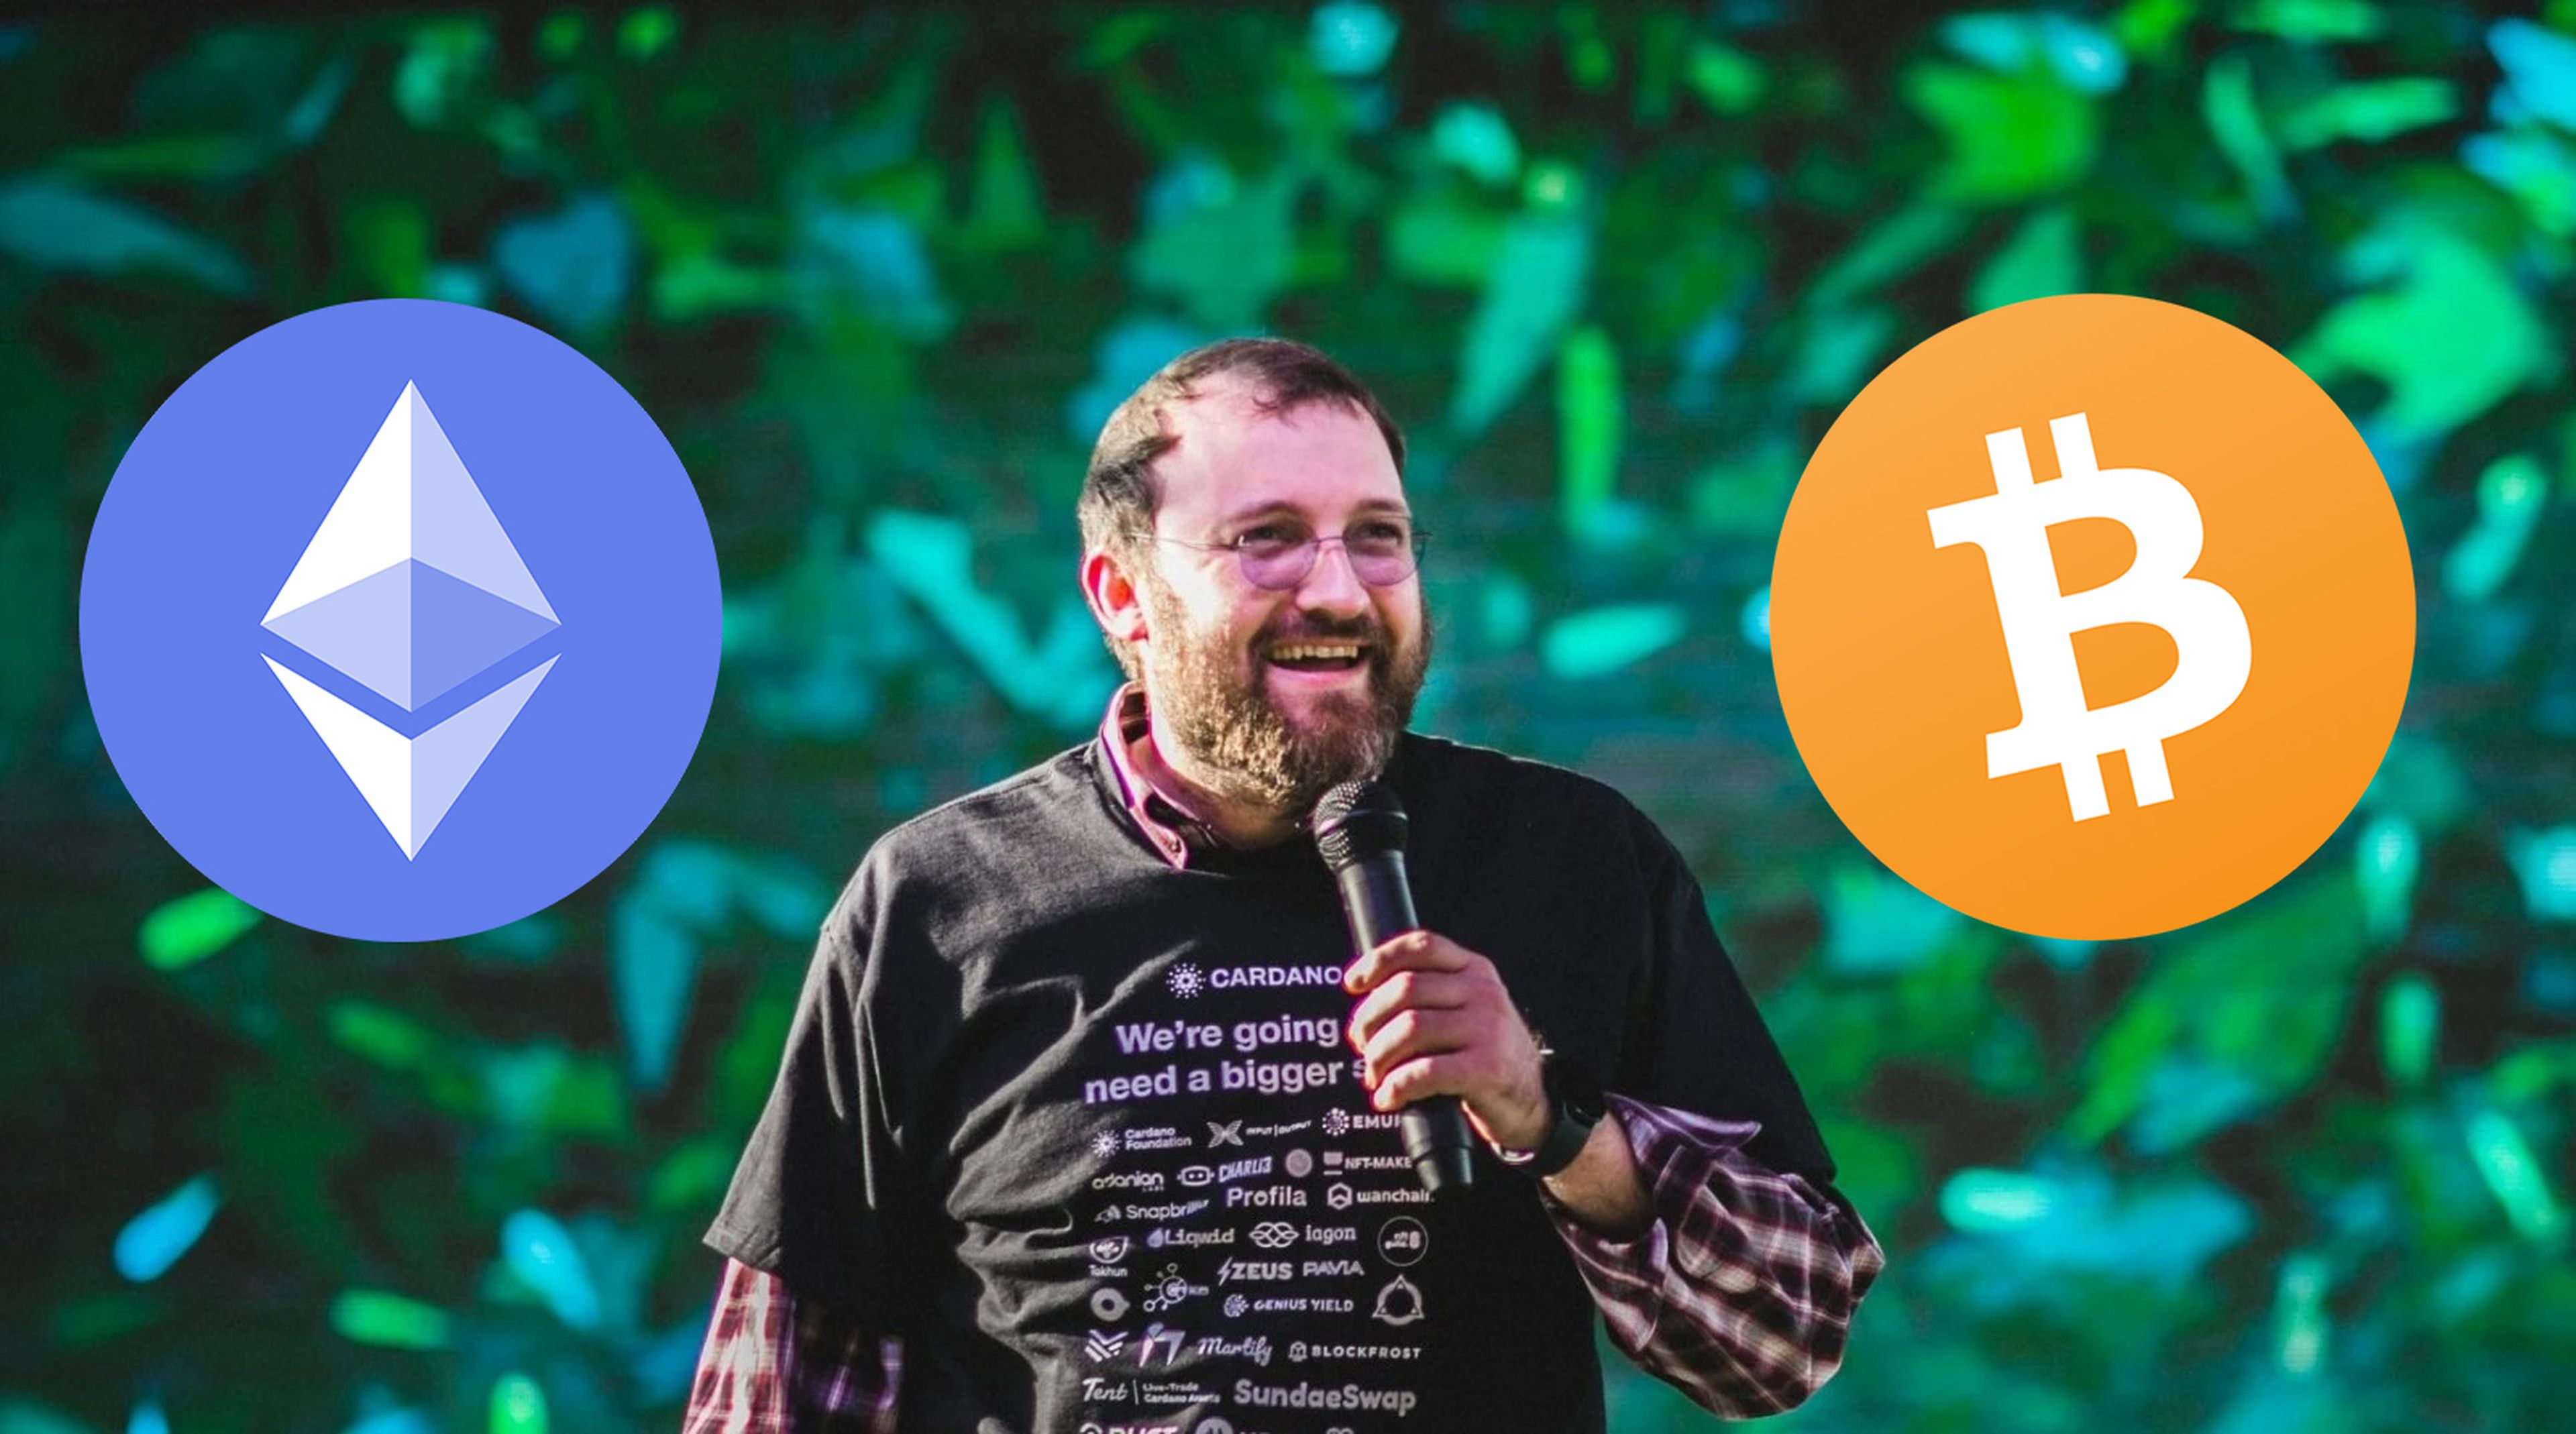 These are the failures of Ethereum and Bitcoin, according to the creator of Cardano